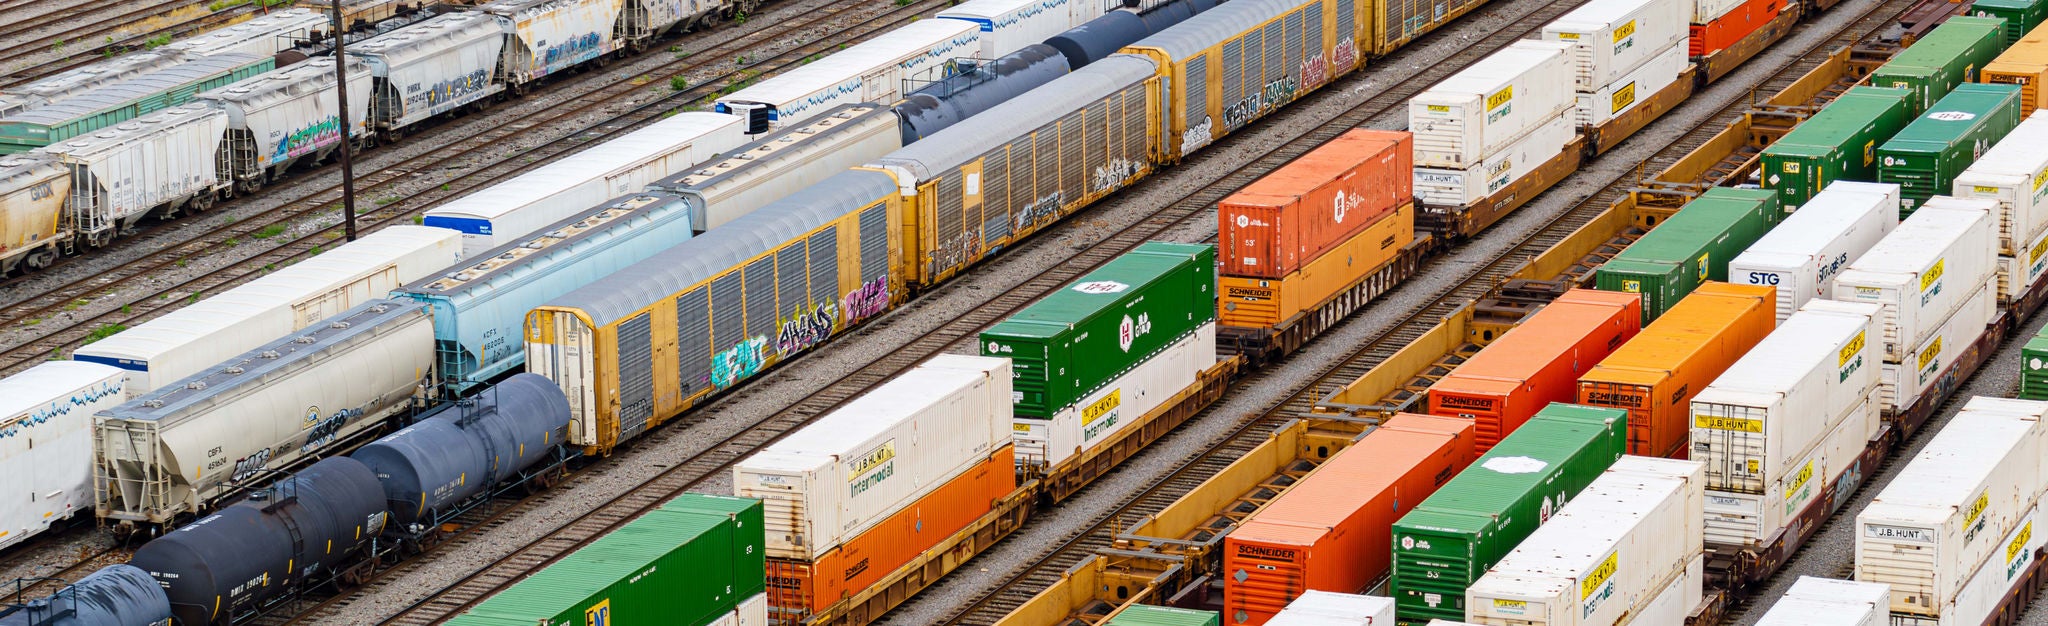 Multiple trains on track ready to help you find your shipping industry